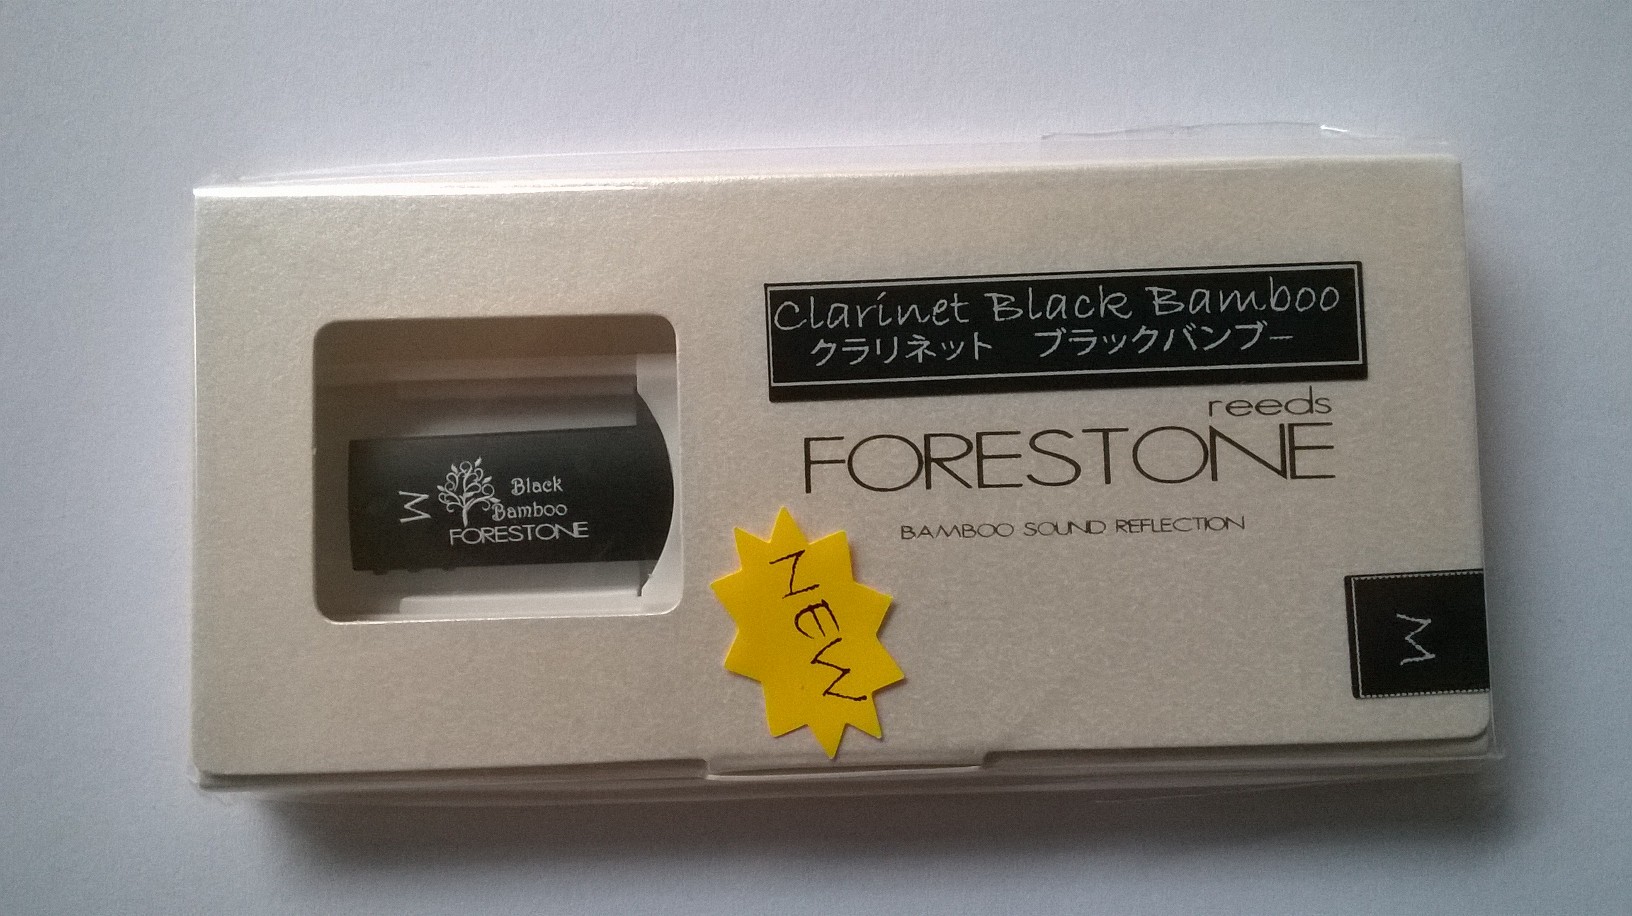 Clarinet B flat & A: Black Bamboo Reed by FORESTONE